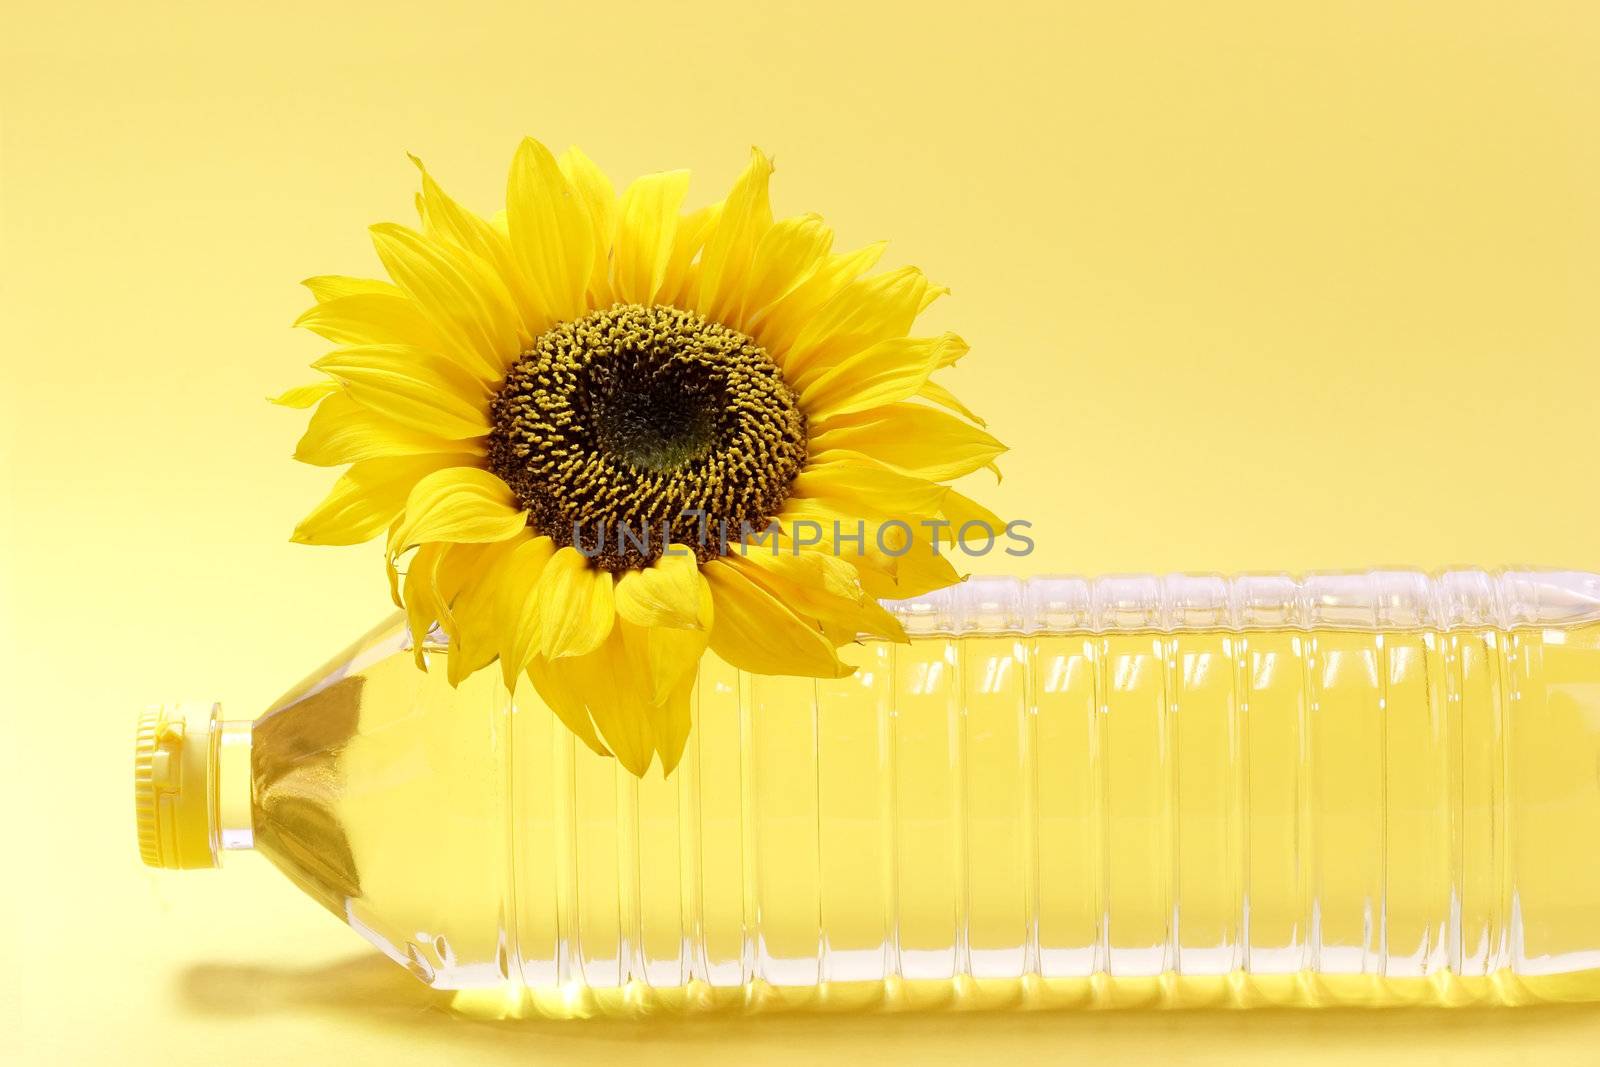 Sunflower with cooking oil bottle on yellow background